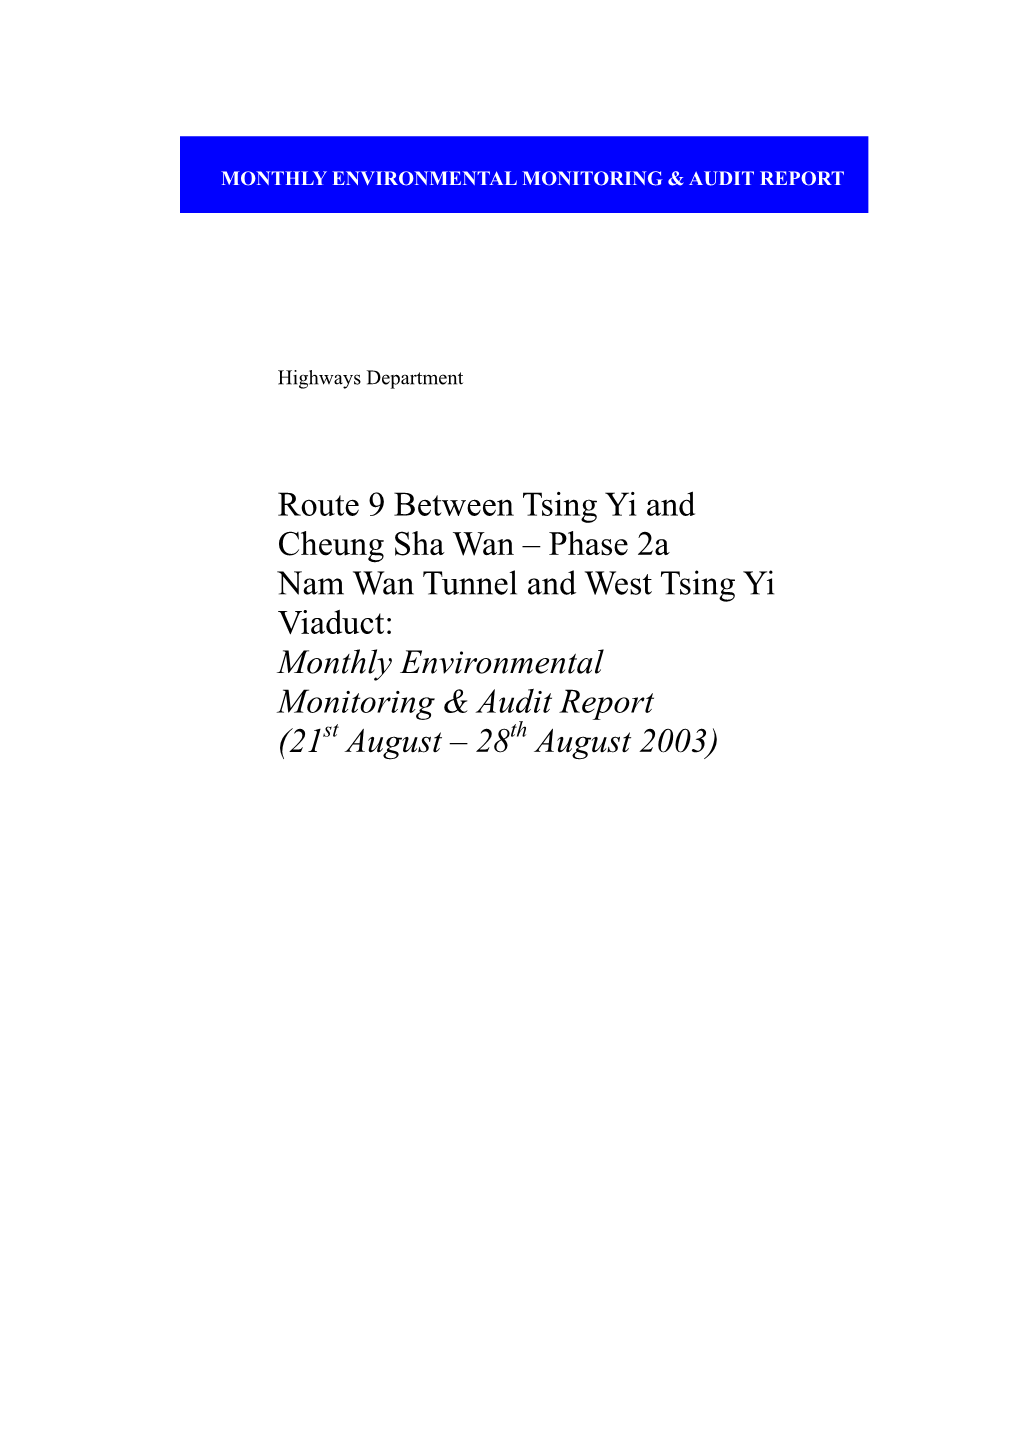 Phase 2A Nam Wan Tunnel and West Tsing Yi Viaduct: Monthly Environmental Monitoring & Audit Report (21St August – 28Th August 2003)